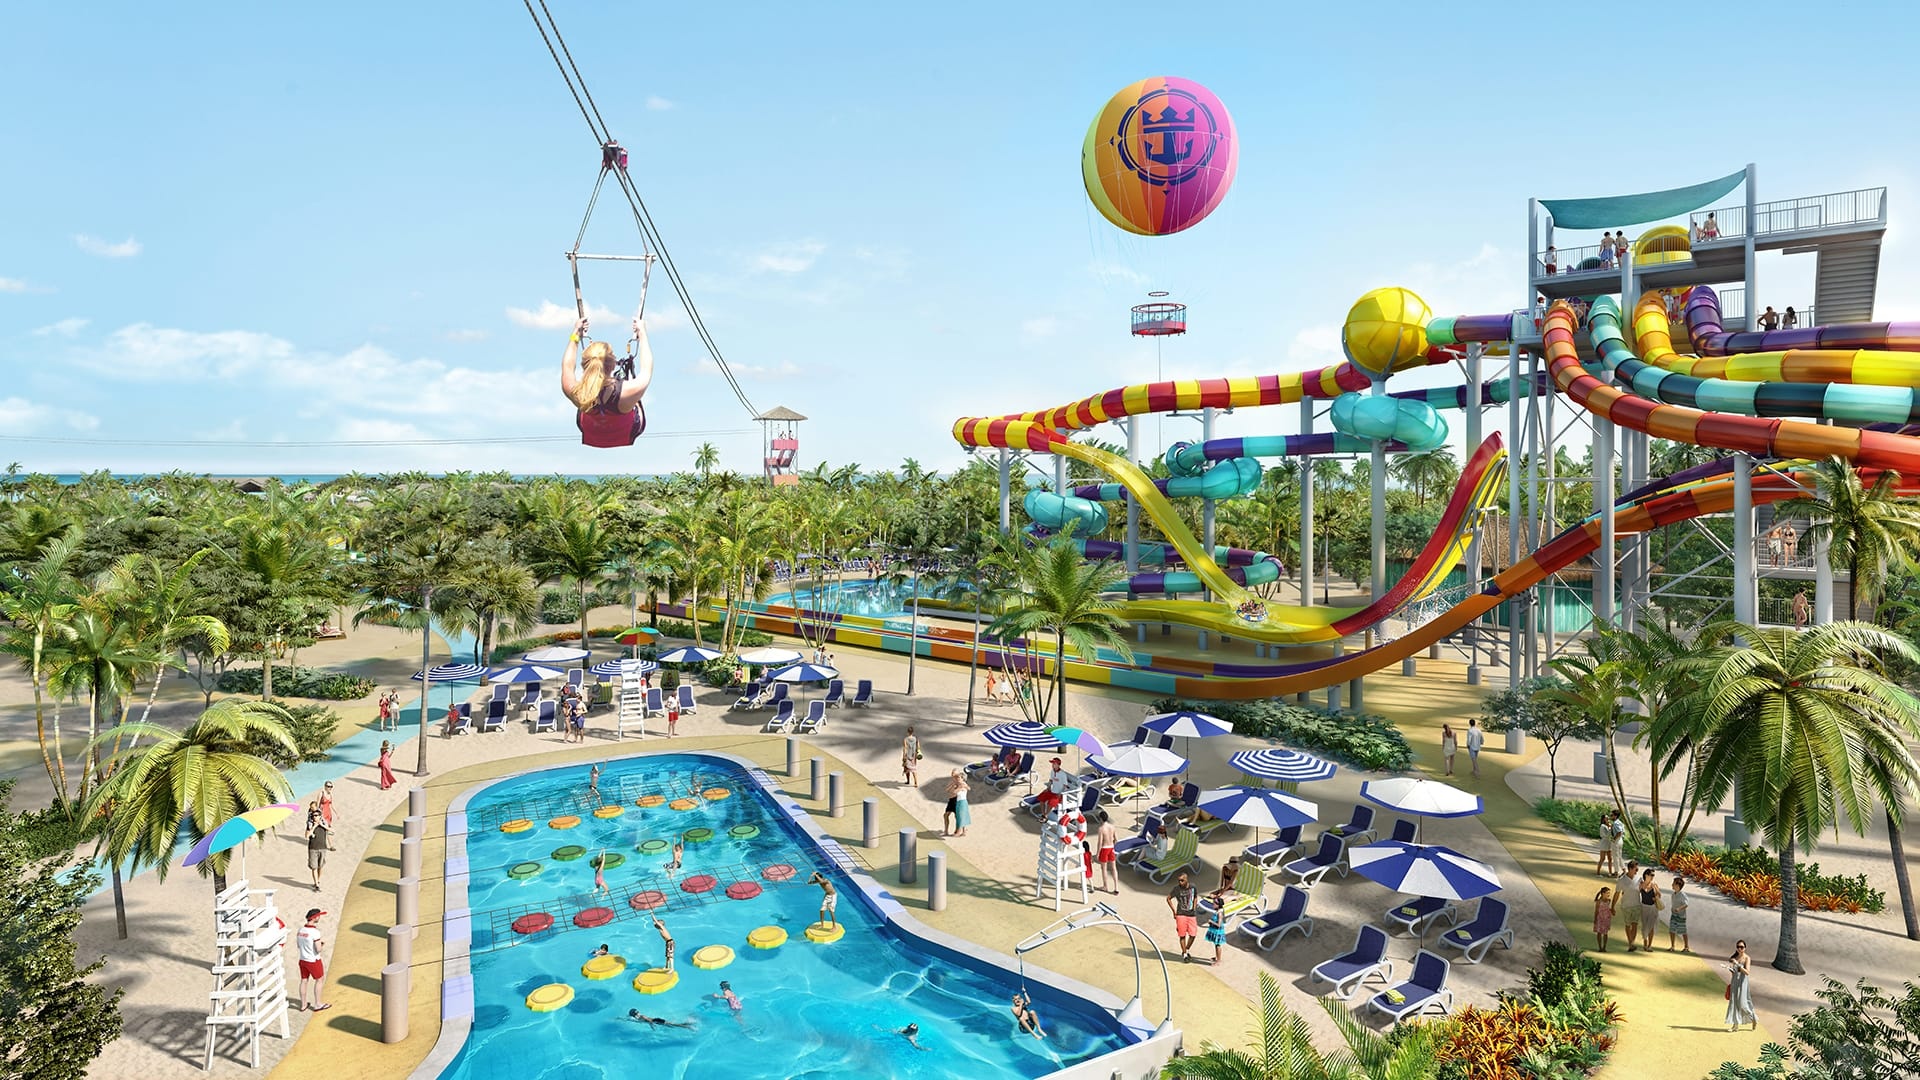 Waterpark: An amusement center with aquatic attractions such as slides. 1920x1080 Full HD Wallpaper.